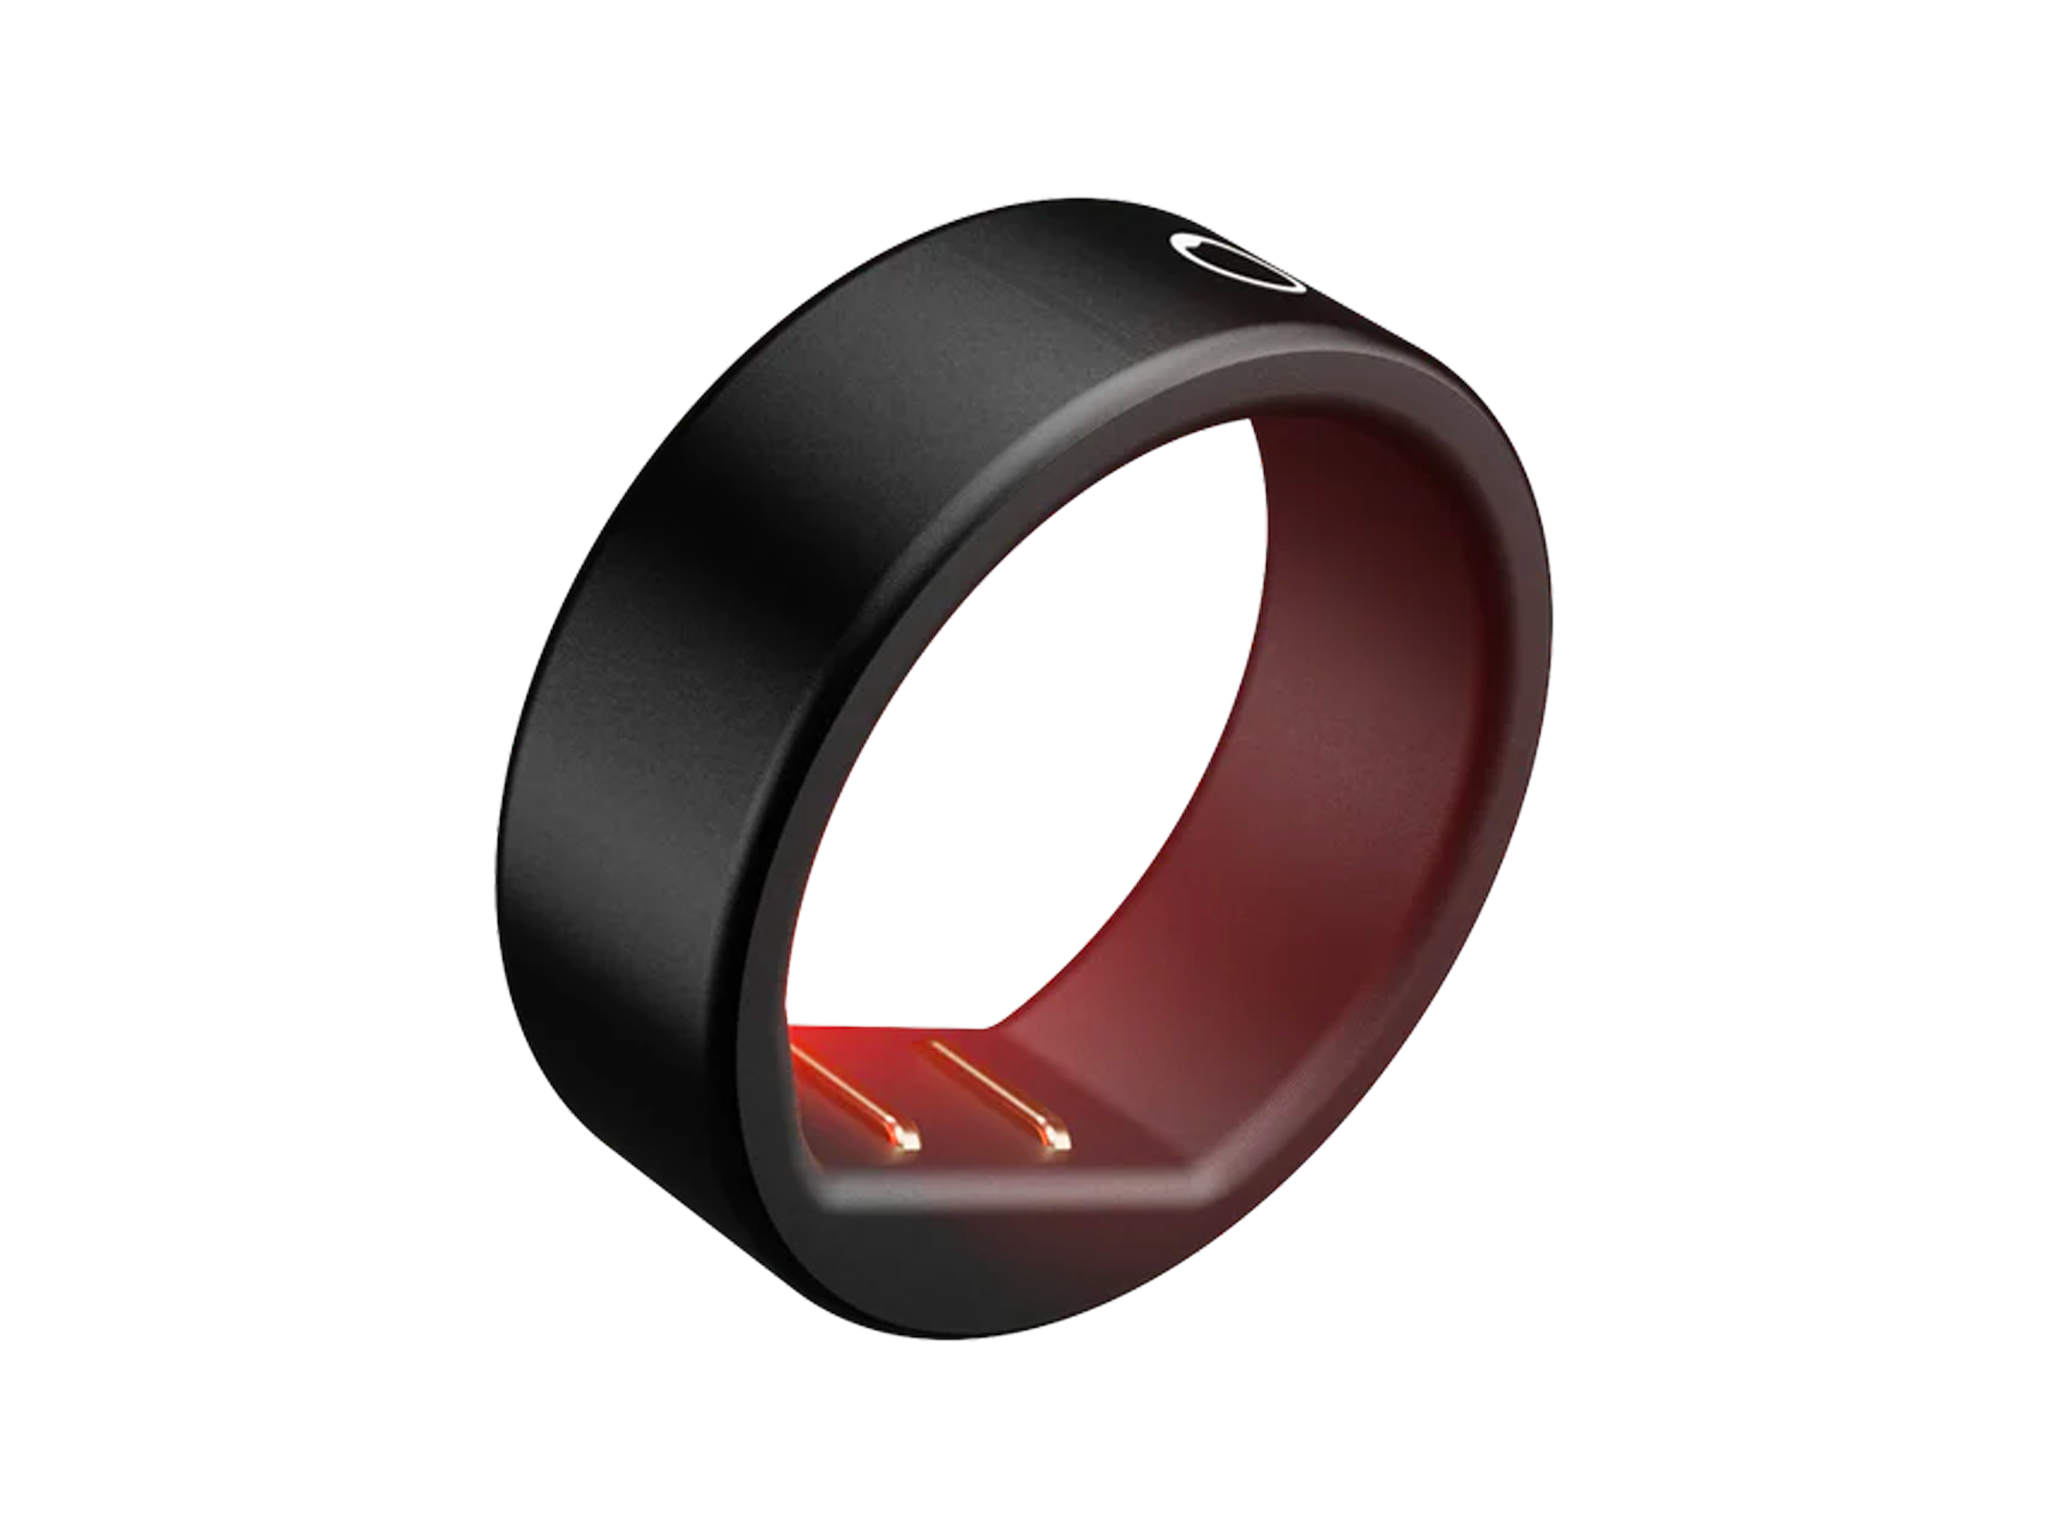 McLEAR Ring contactless payment wearable lets you make secure payments